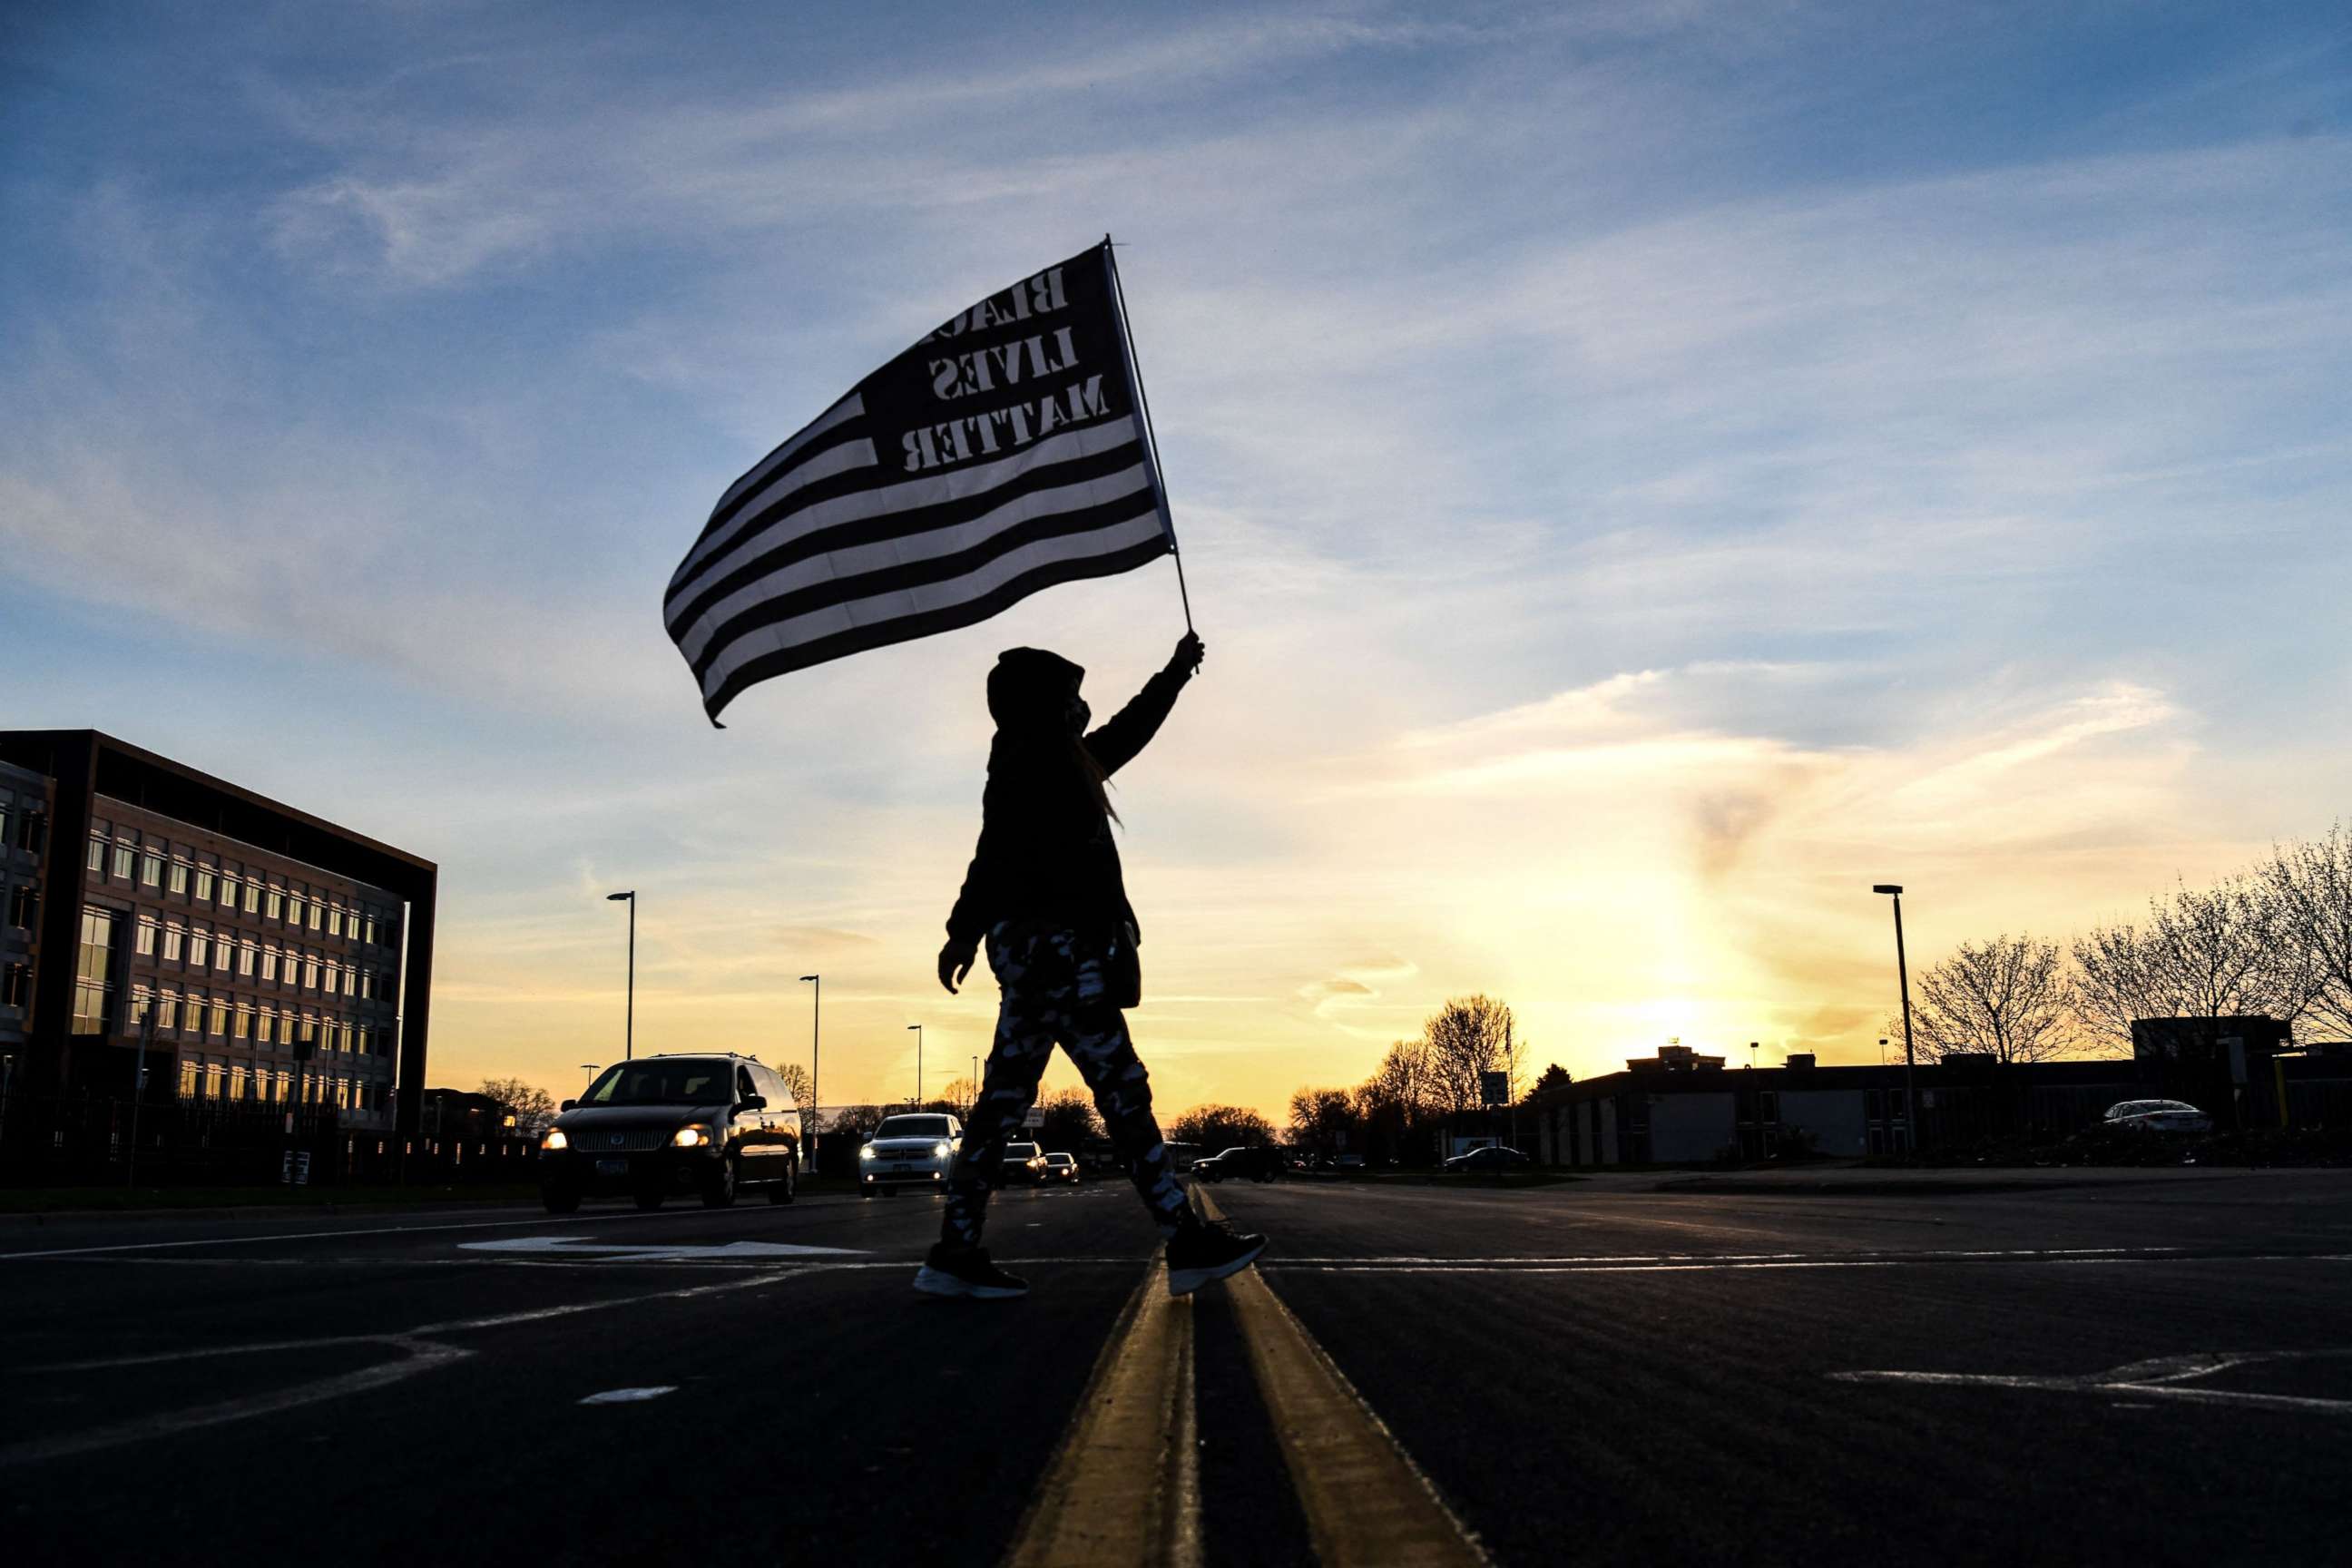 PHOTO: A demonstrator marches, holding a Black Lives Matter flag, during the sixth night of protests over the shooting death of Daunte Wright by a police officer in Brooklyn Center, Minnesota, on April 16, 2021.